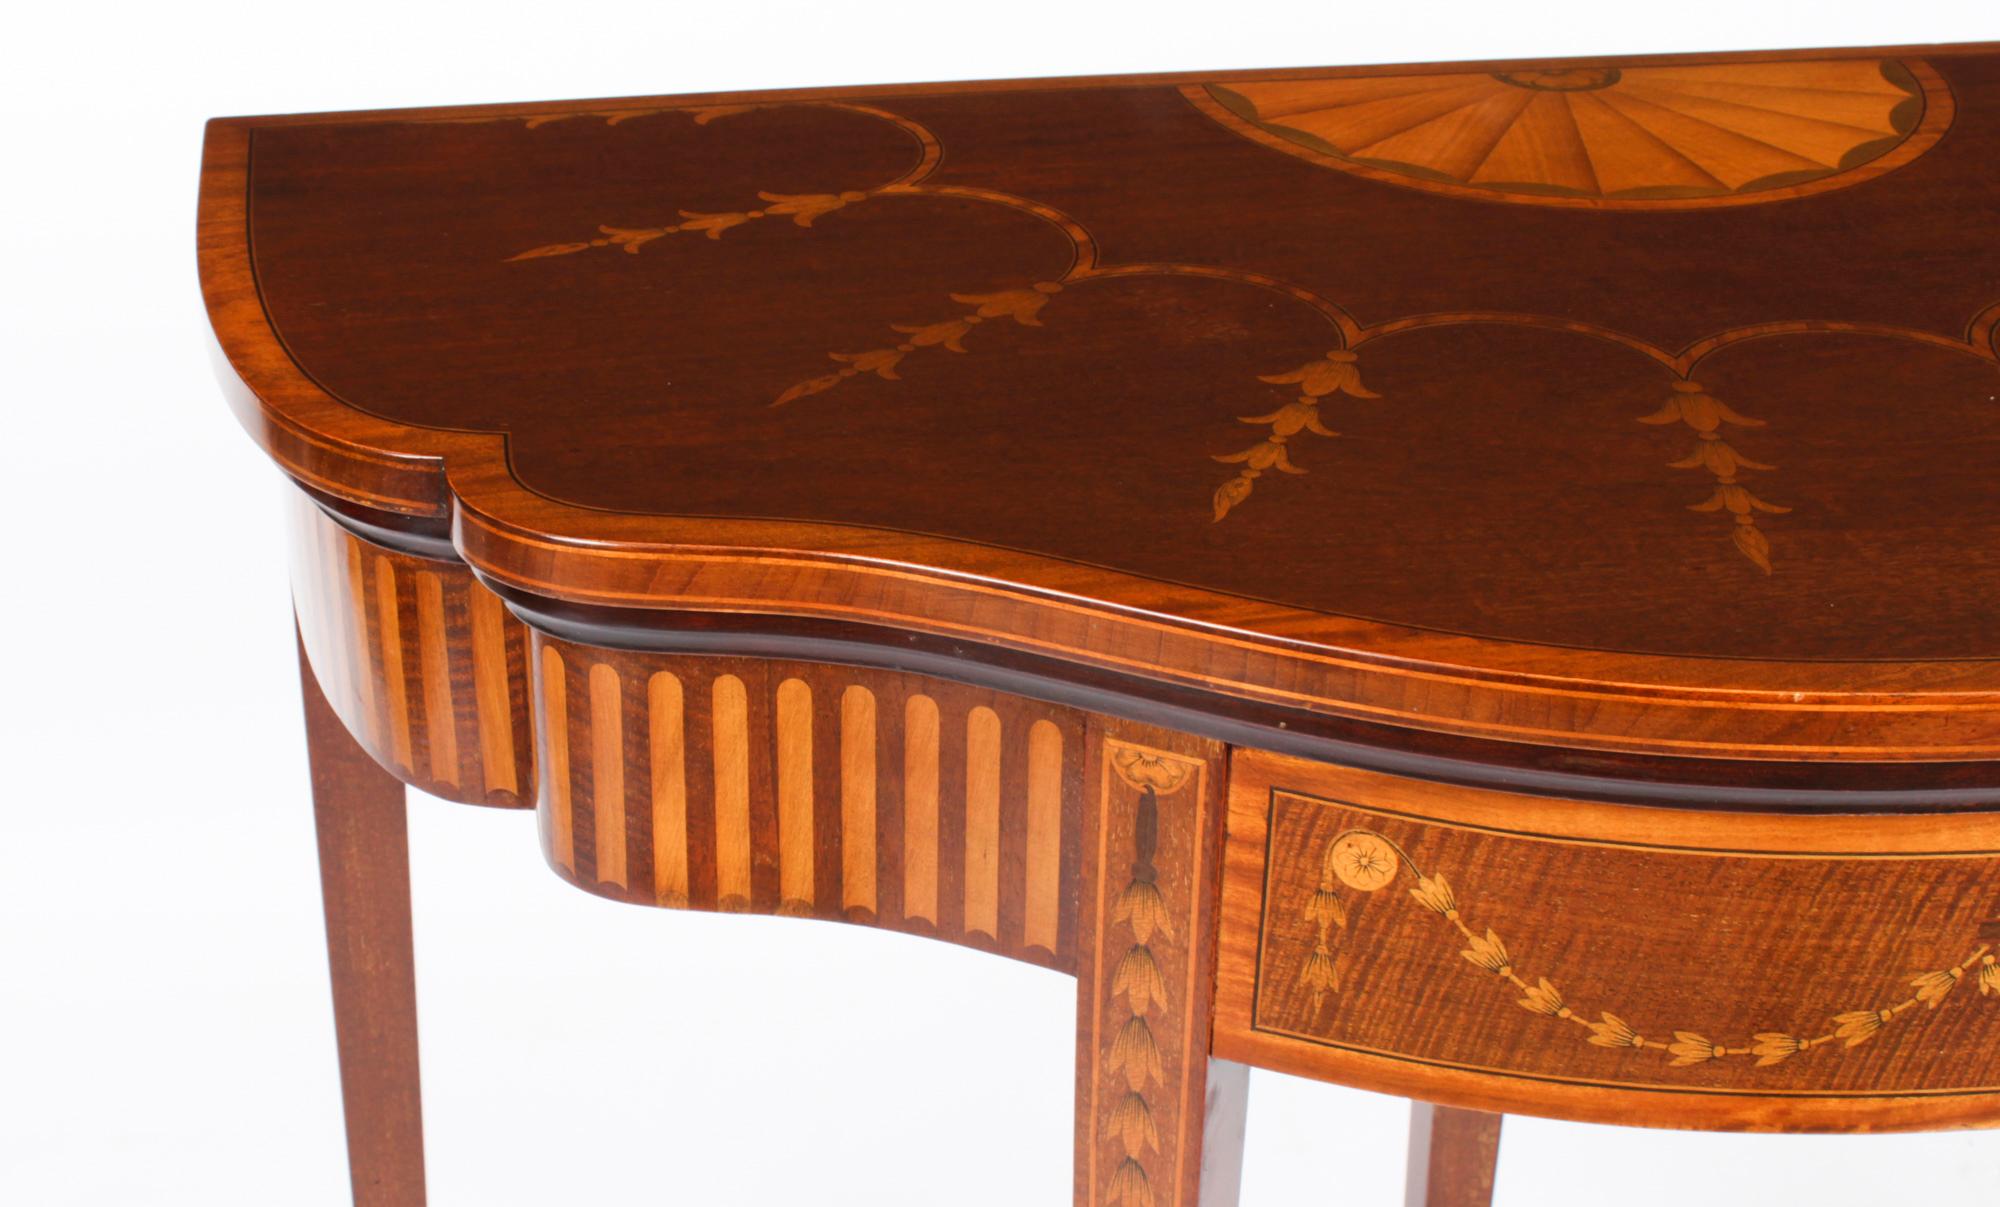 Antique Mahogany and Satinwood Inlaid Serpentine Card Console Table 19th Century For Sale 7